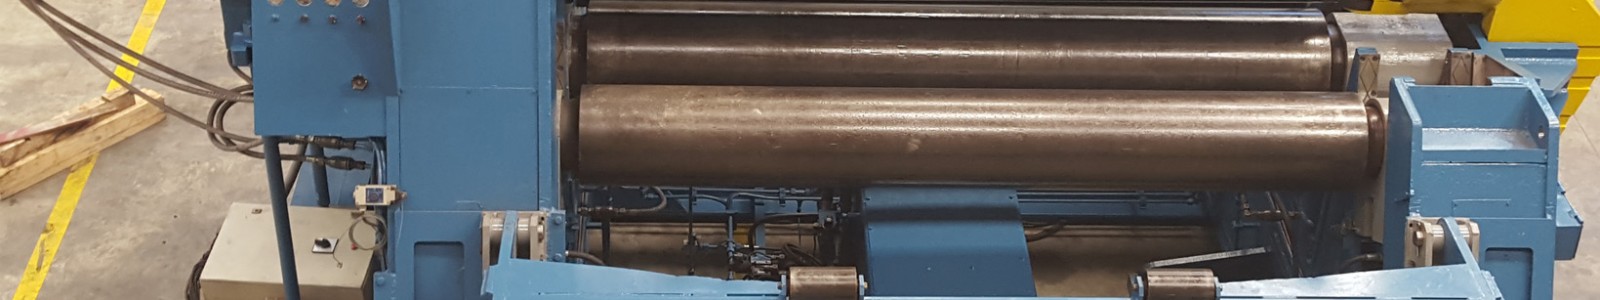 The bending rolls are sheet metal forming machines